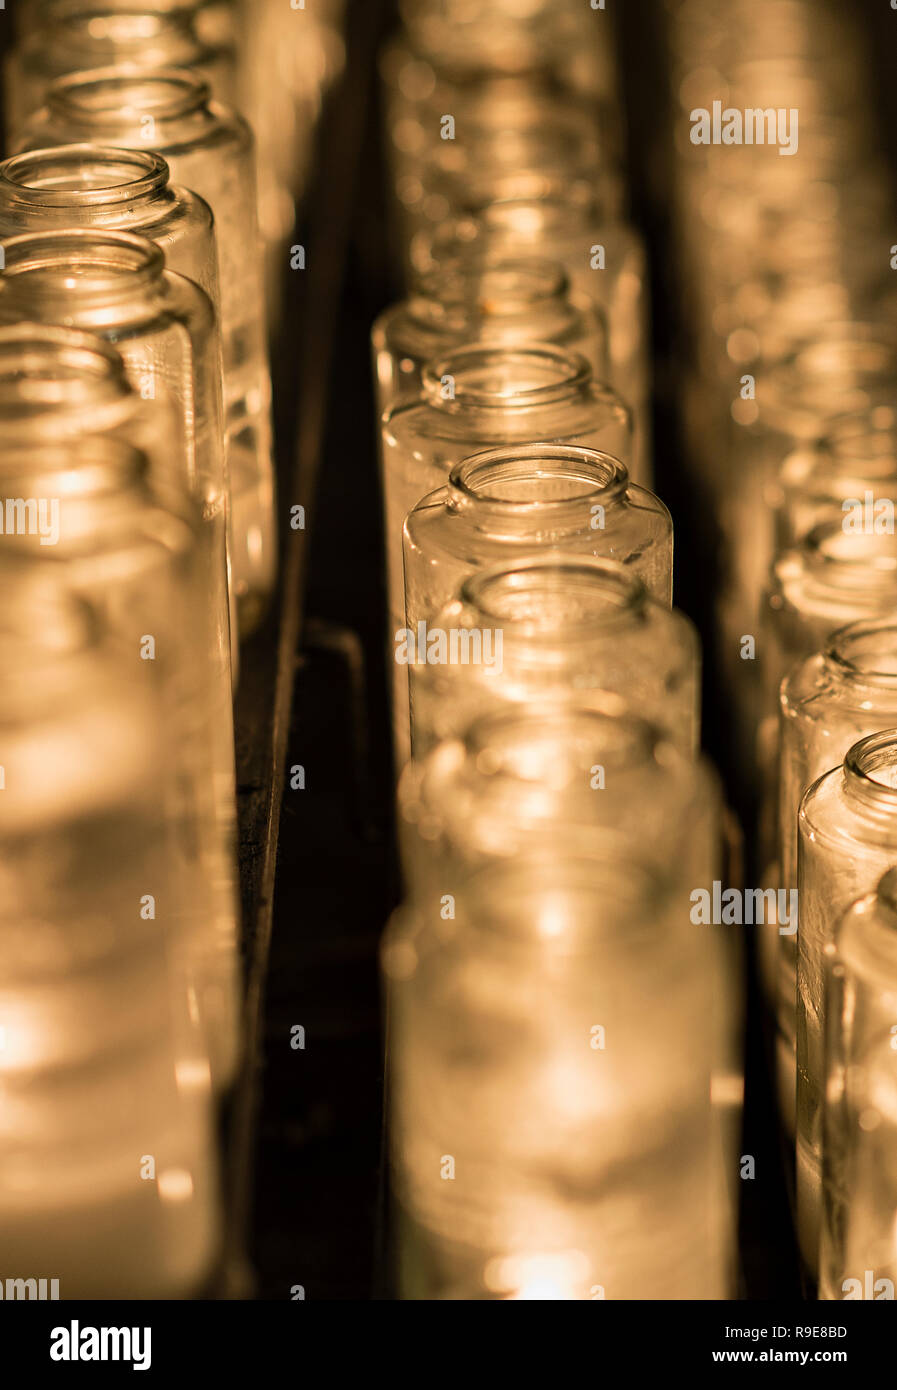 Votive candles in a catholic church. Stock Photo